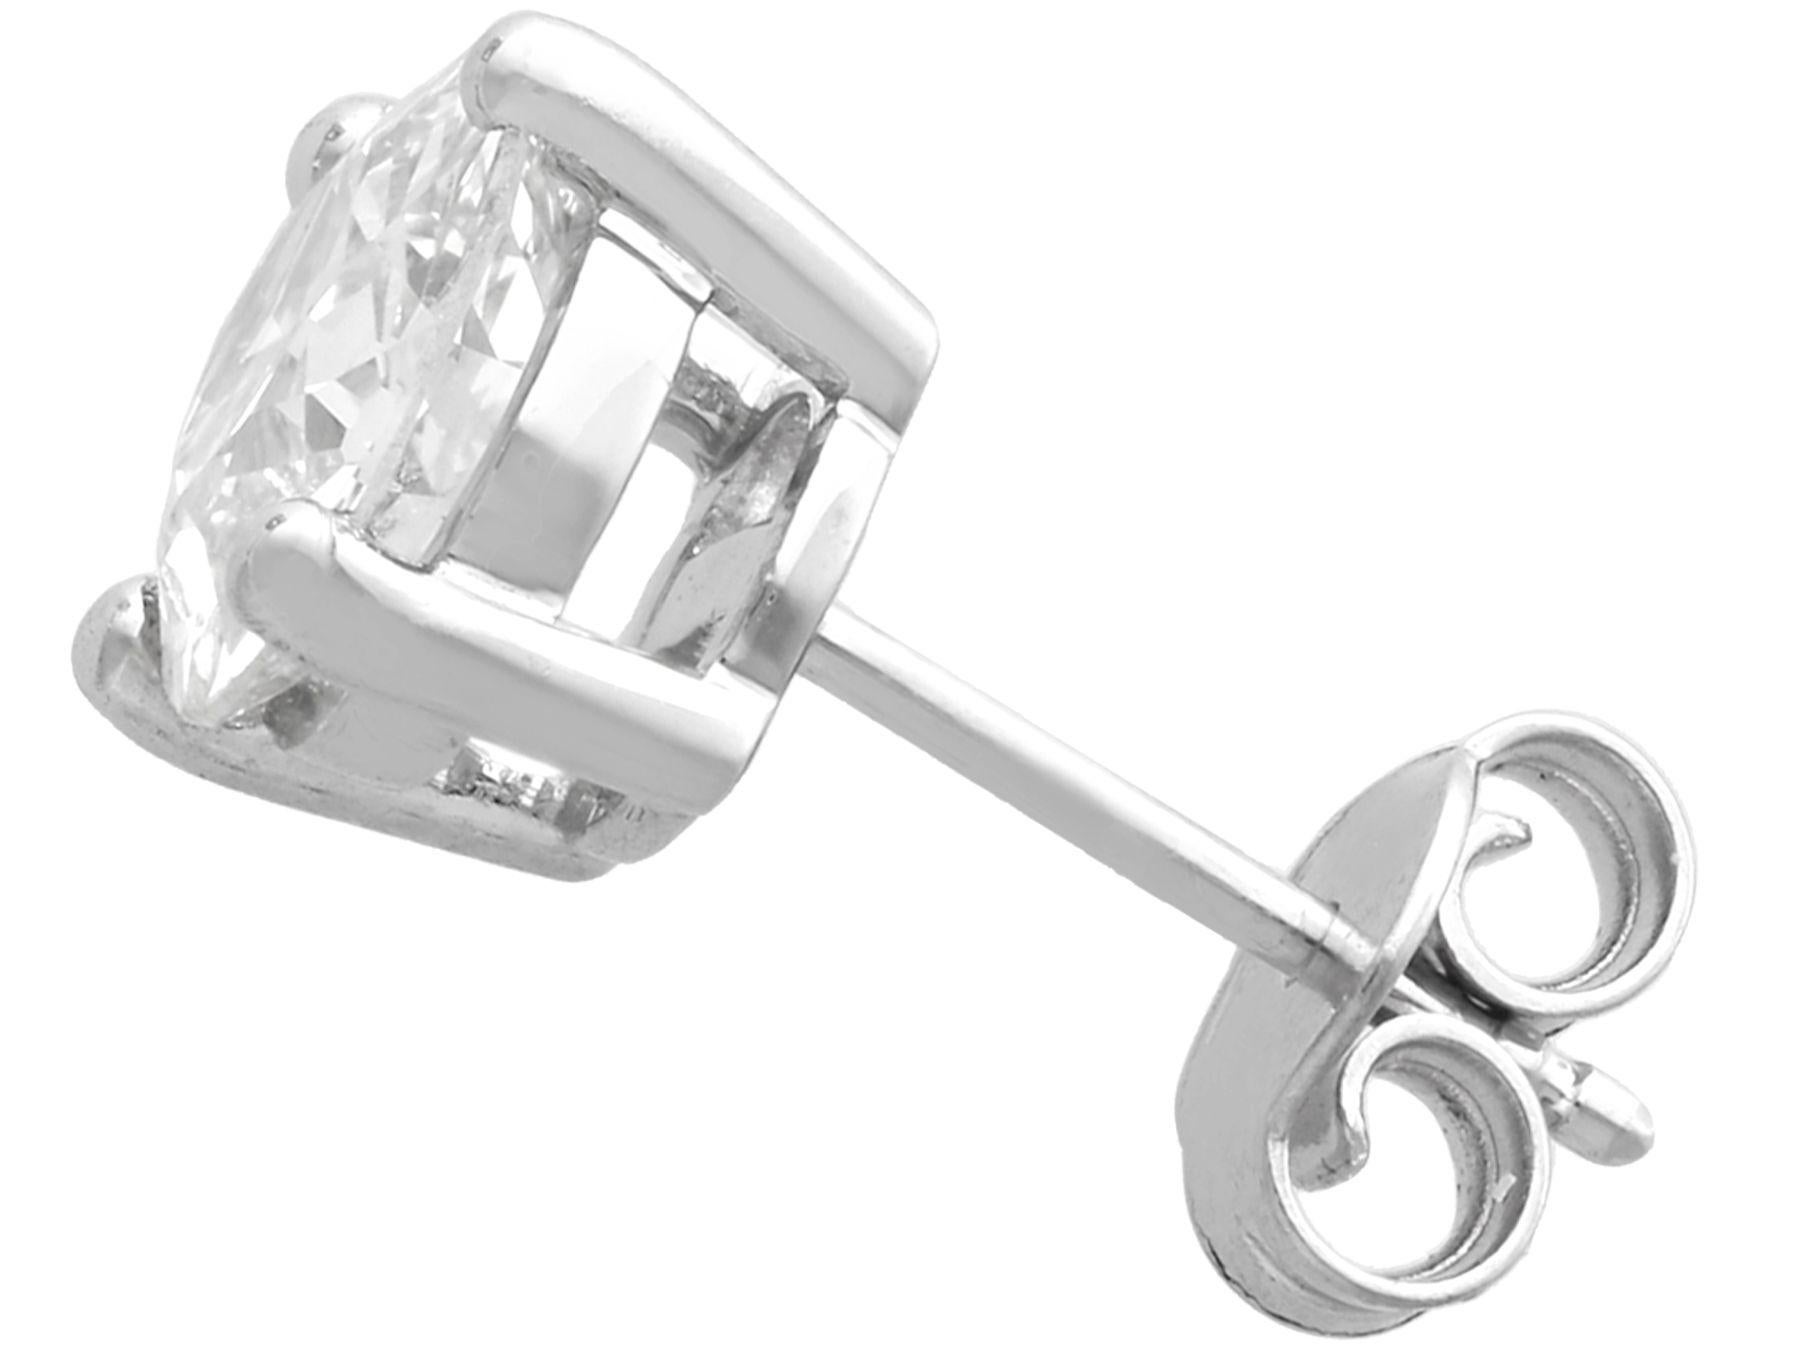 2.91 Carat Diamond 18k White Gold Stud Earrings In Excellent Condition For Sale In Jesmond, Newcastle Upon Tyne